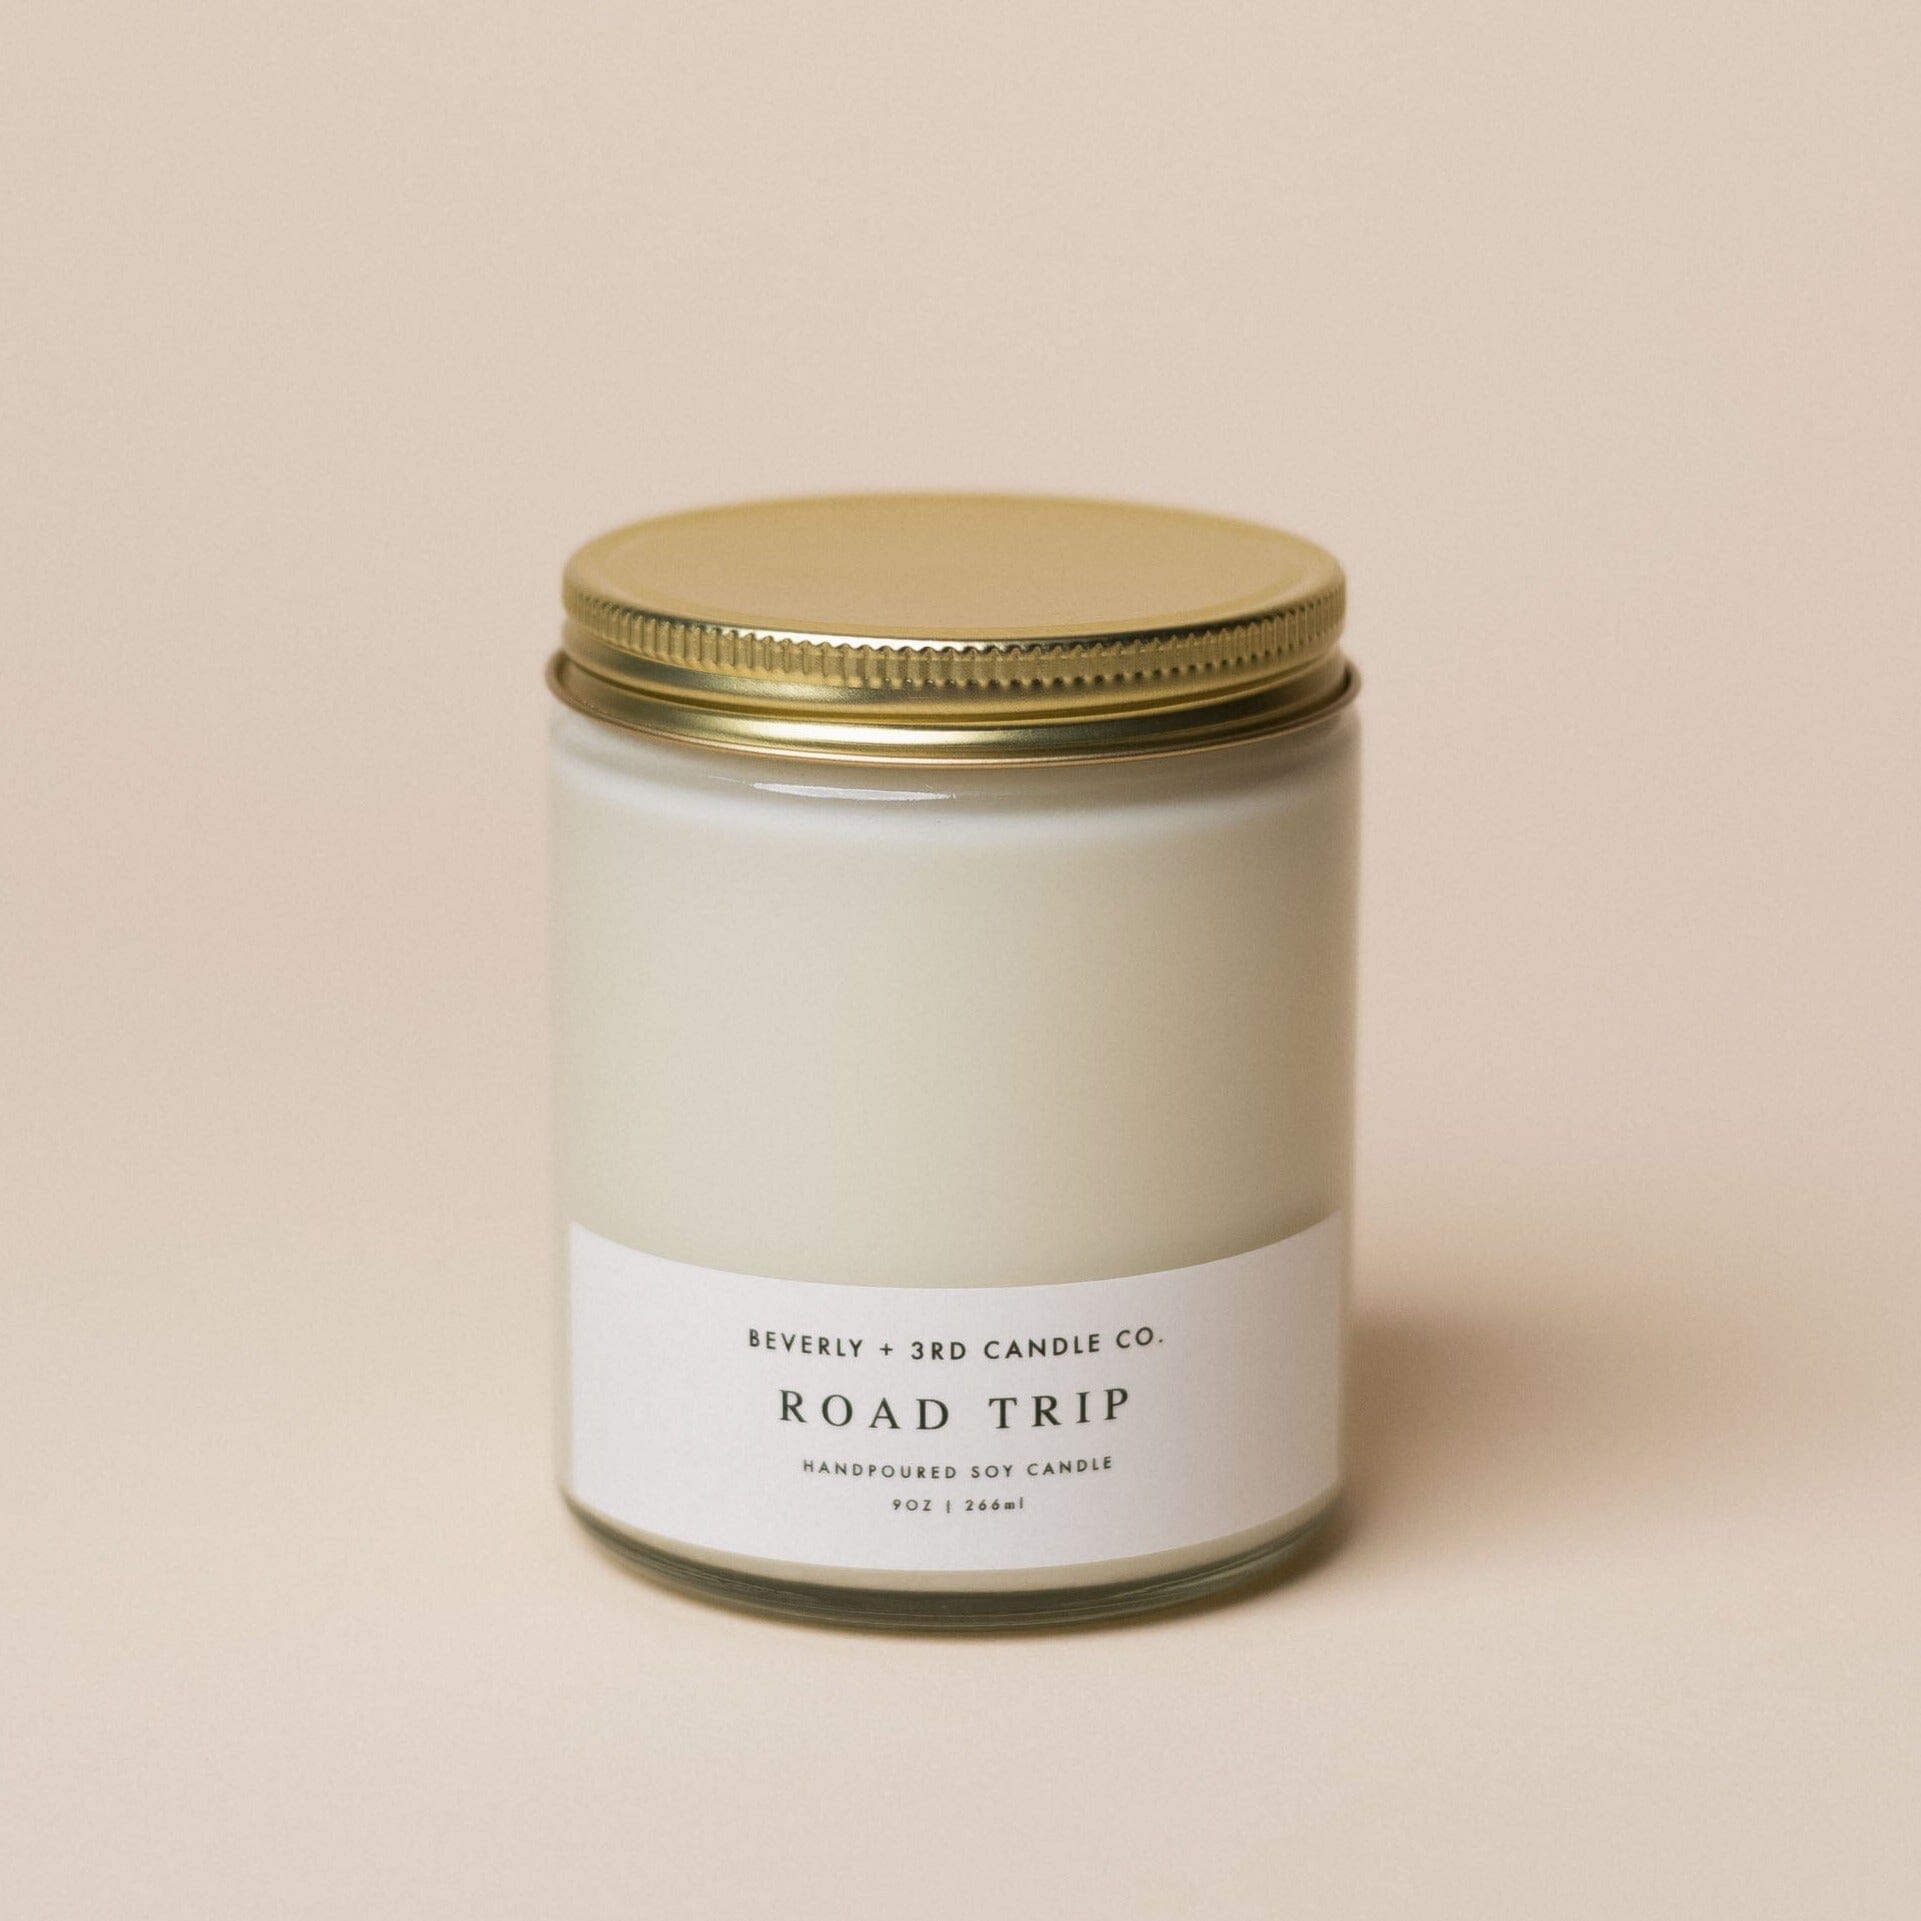 The Road Trip candle, its hitting the open road with the windows rolled down, the breeze blowing through your hair, laughter, and some of your favorite memories. Road Trip captures the fresh aroma of flowers, green leaves, a hint of aloe and agave.